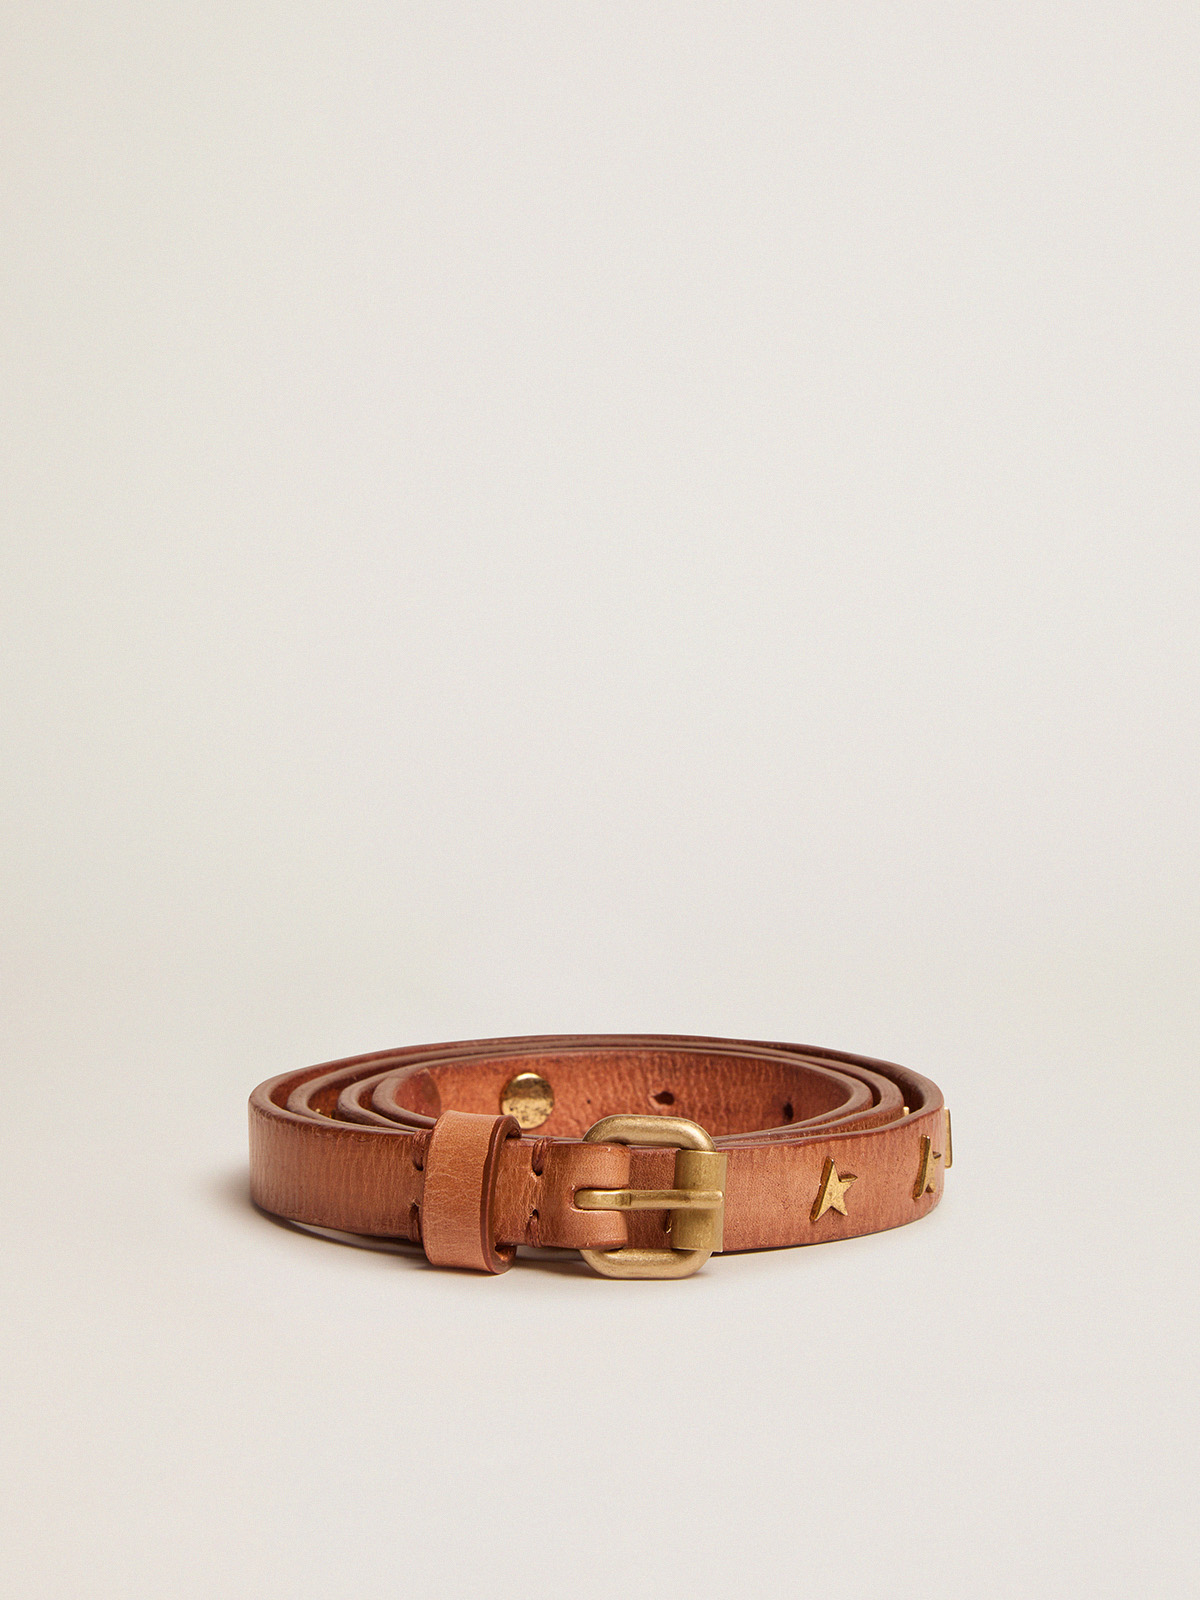 Leather grey belt Louis Vuitton, buy pre-owned at 223 EUR